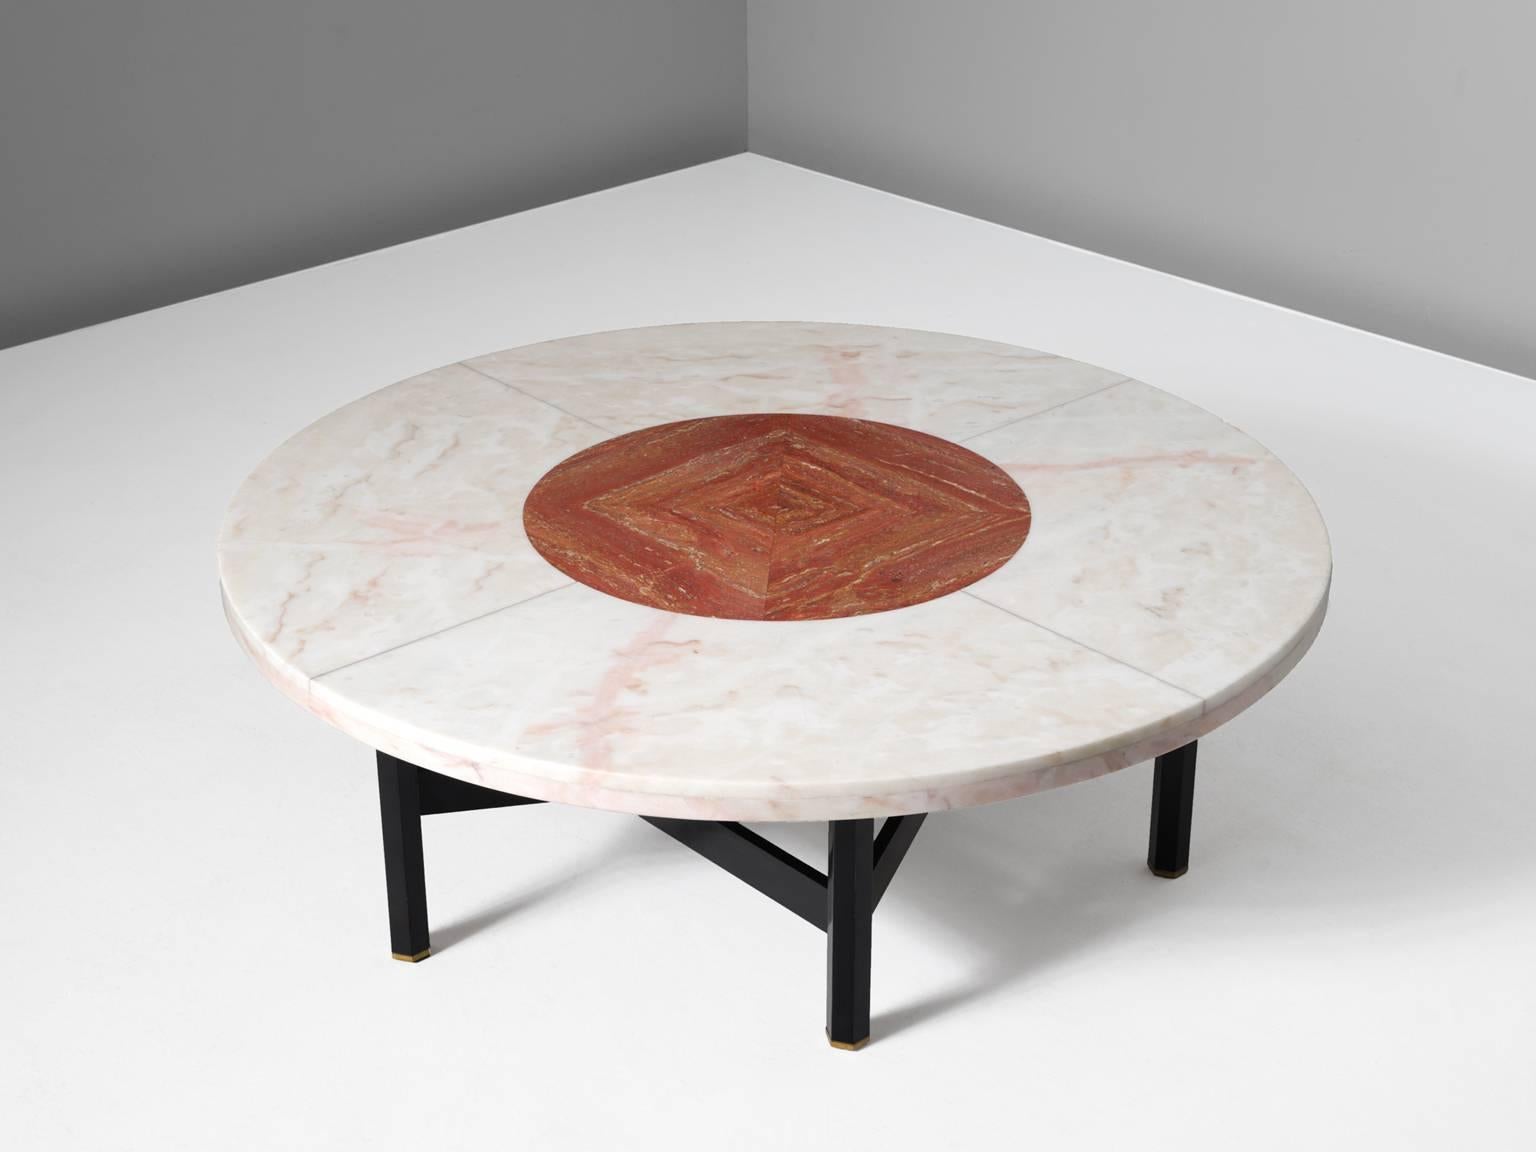 Cocktail table, in wood, marble, travertine and brass by Jan Vlug / Jules Wabbes, Belgium, 1970s.

Exclusive coffee table with characteristic graphical base and round stone top. The base, made of dark lacquered wood, consists of six legs, formed